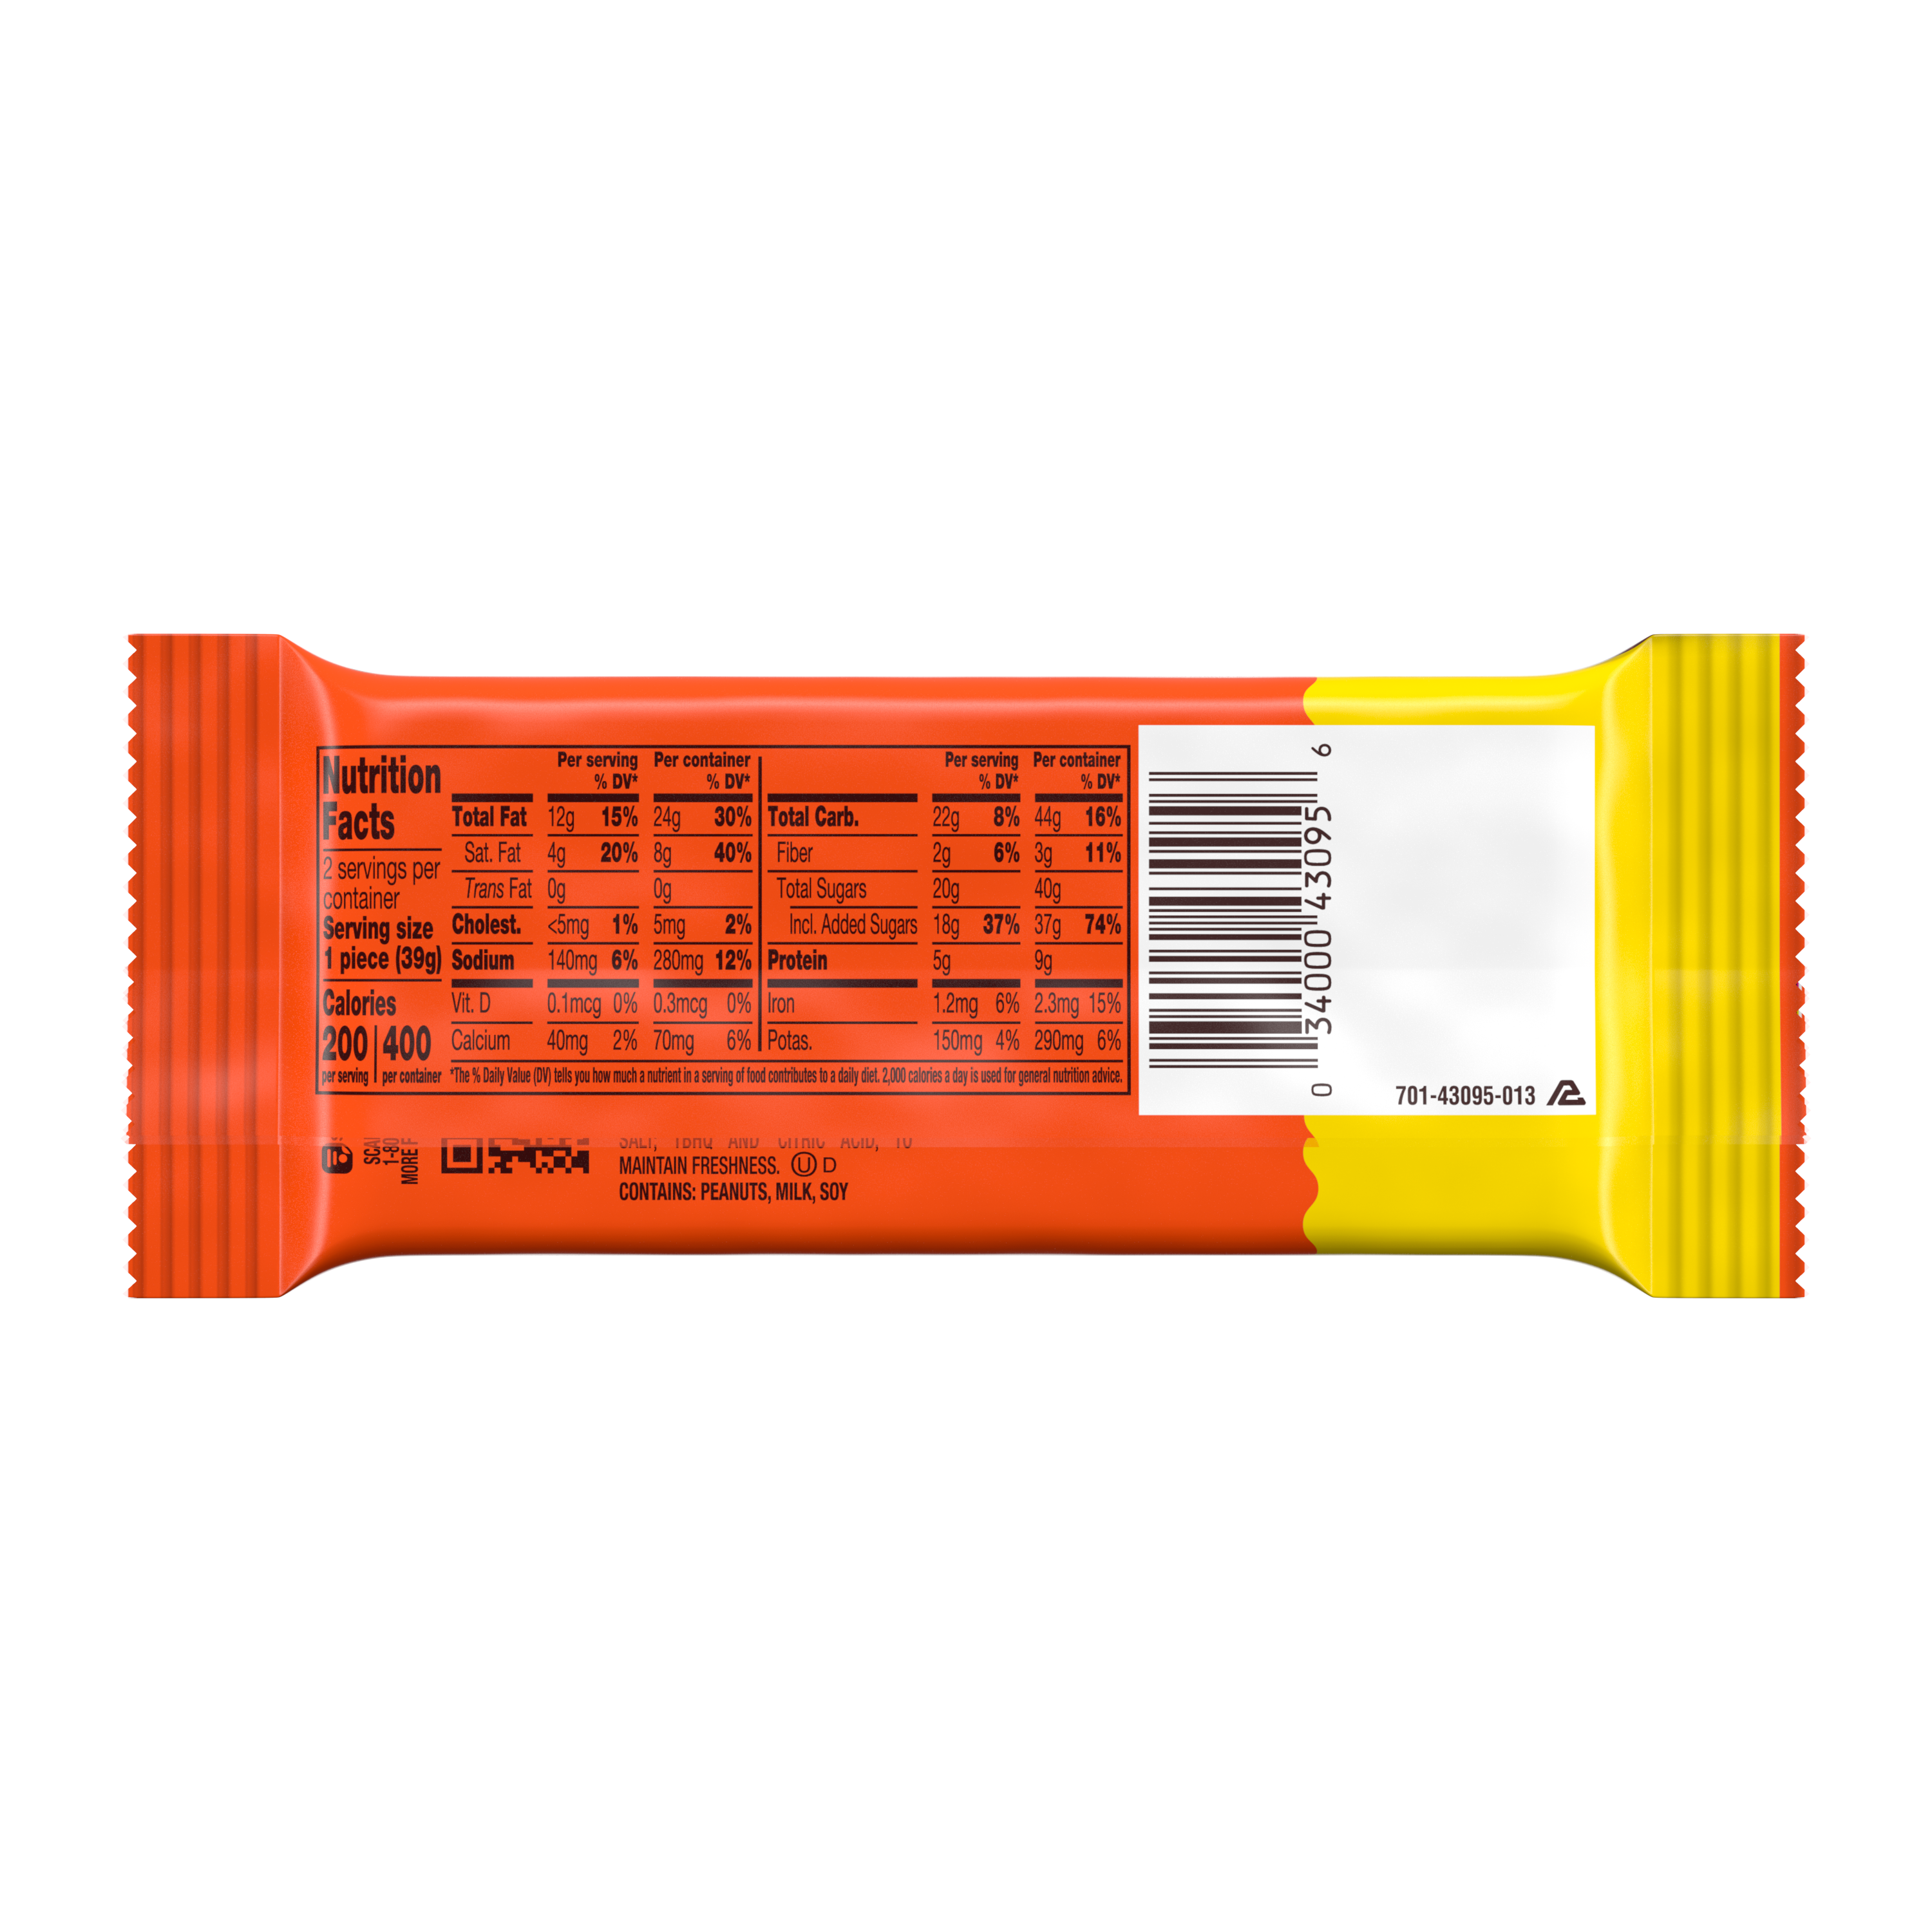 REESE'S Big Cup Milk Chocolate King Size Peanut Butter Cups, 2.8 oz - Back of Package